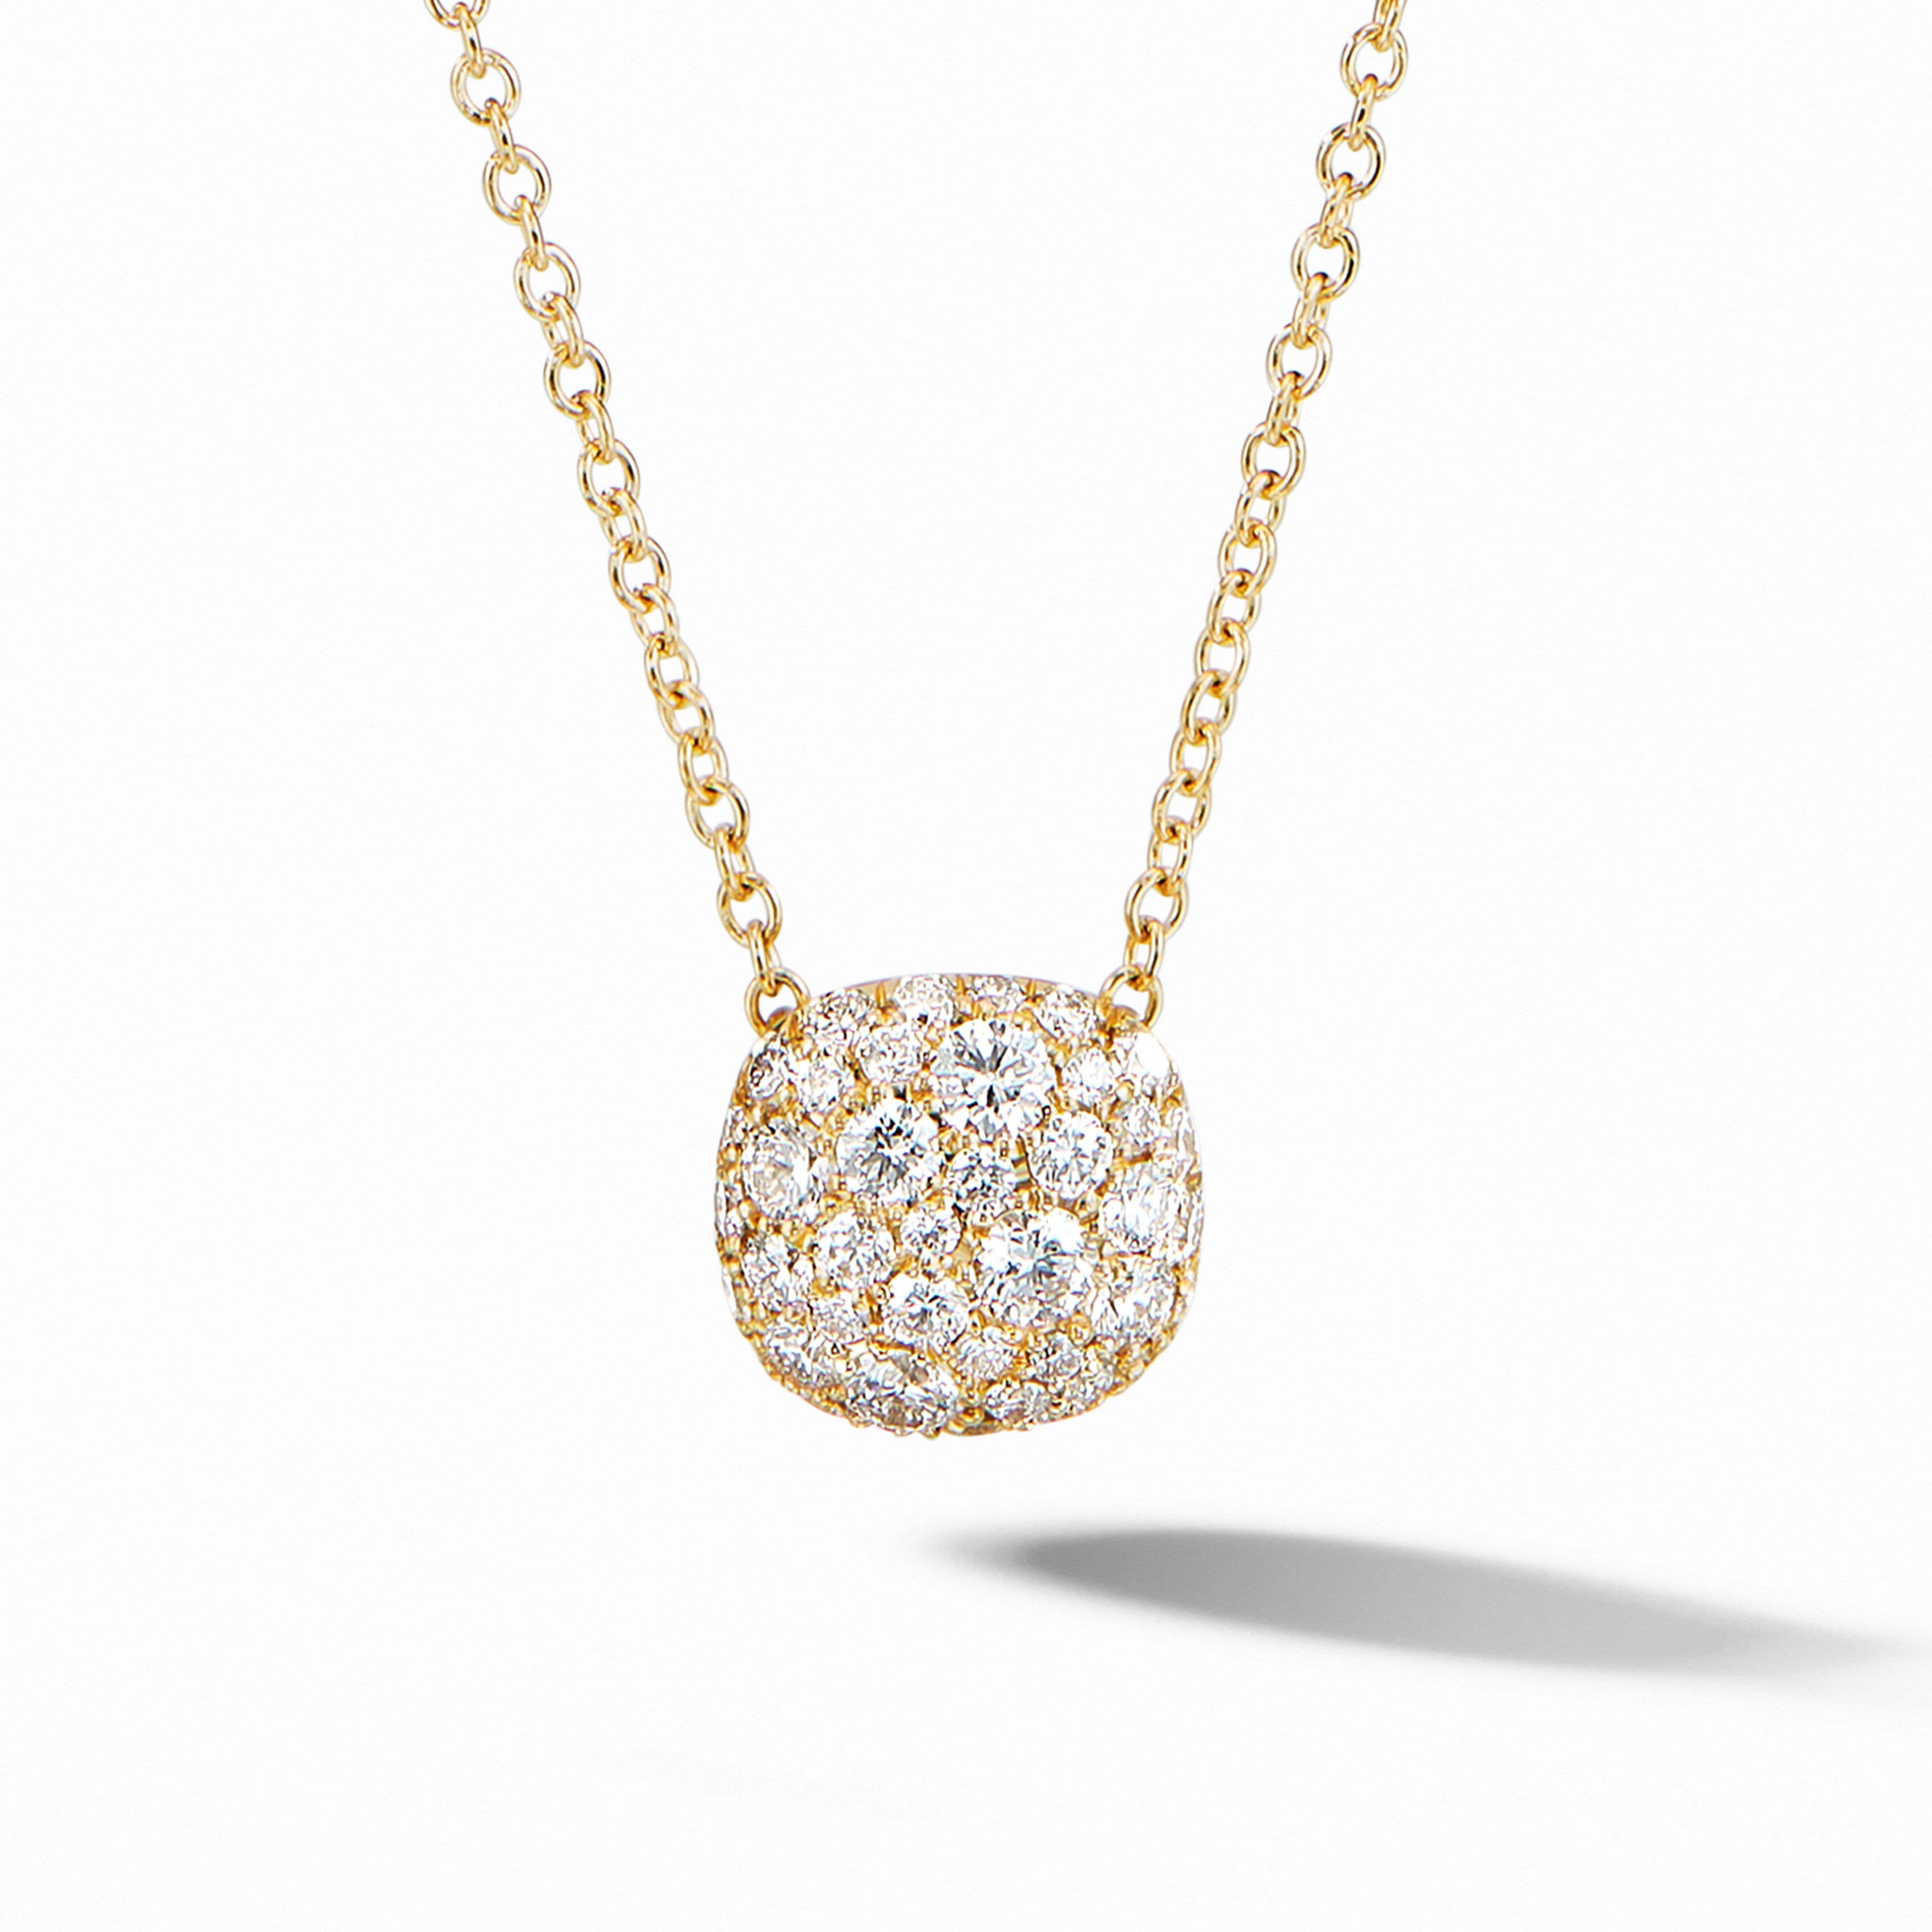 Cushion Stud Pendant Necklace in 18K Yellow Gold with Pavé Diamonds